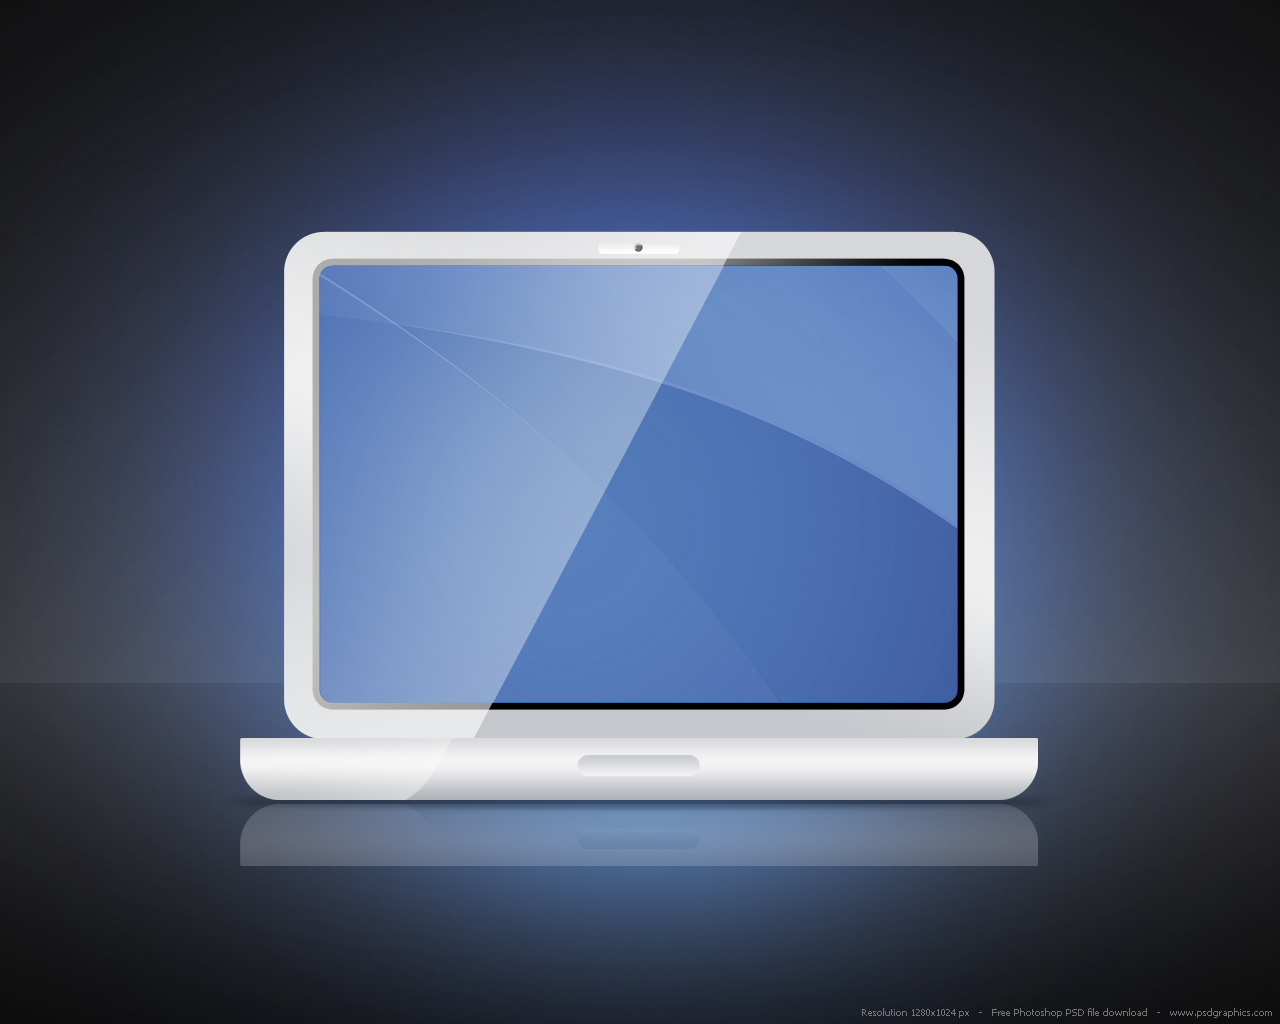 14 Top Of Laptop PSD Images